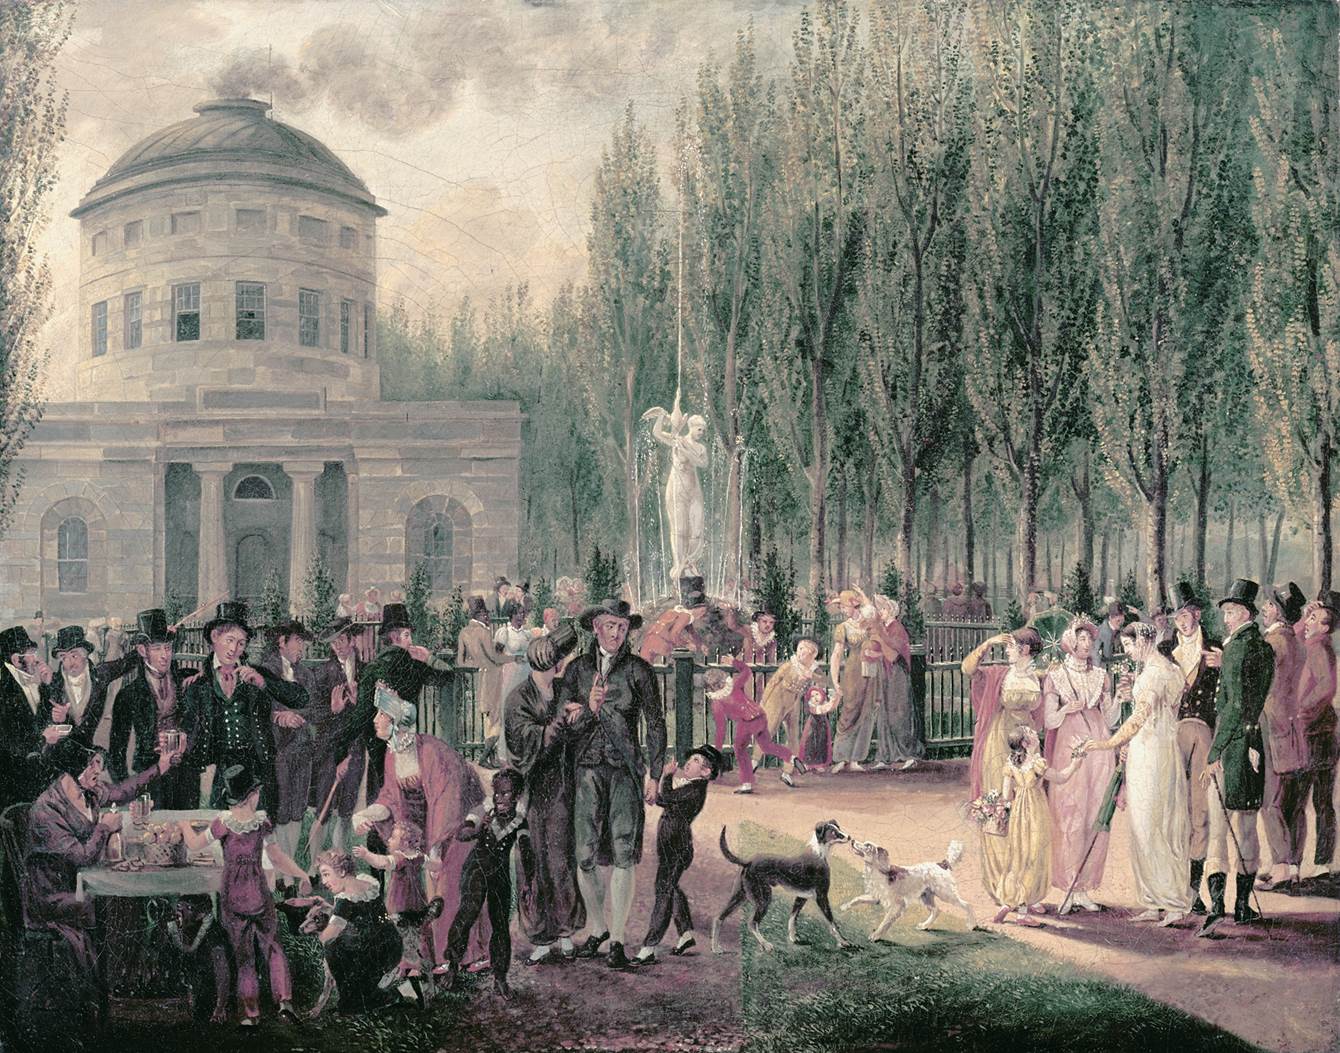 John Lewis Krimmel’s painting of the Fourth of July in Centre Square Philadelphia (1812) shows the d